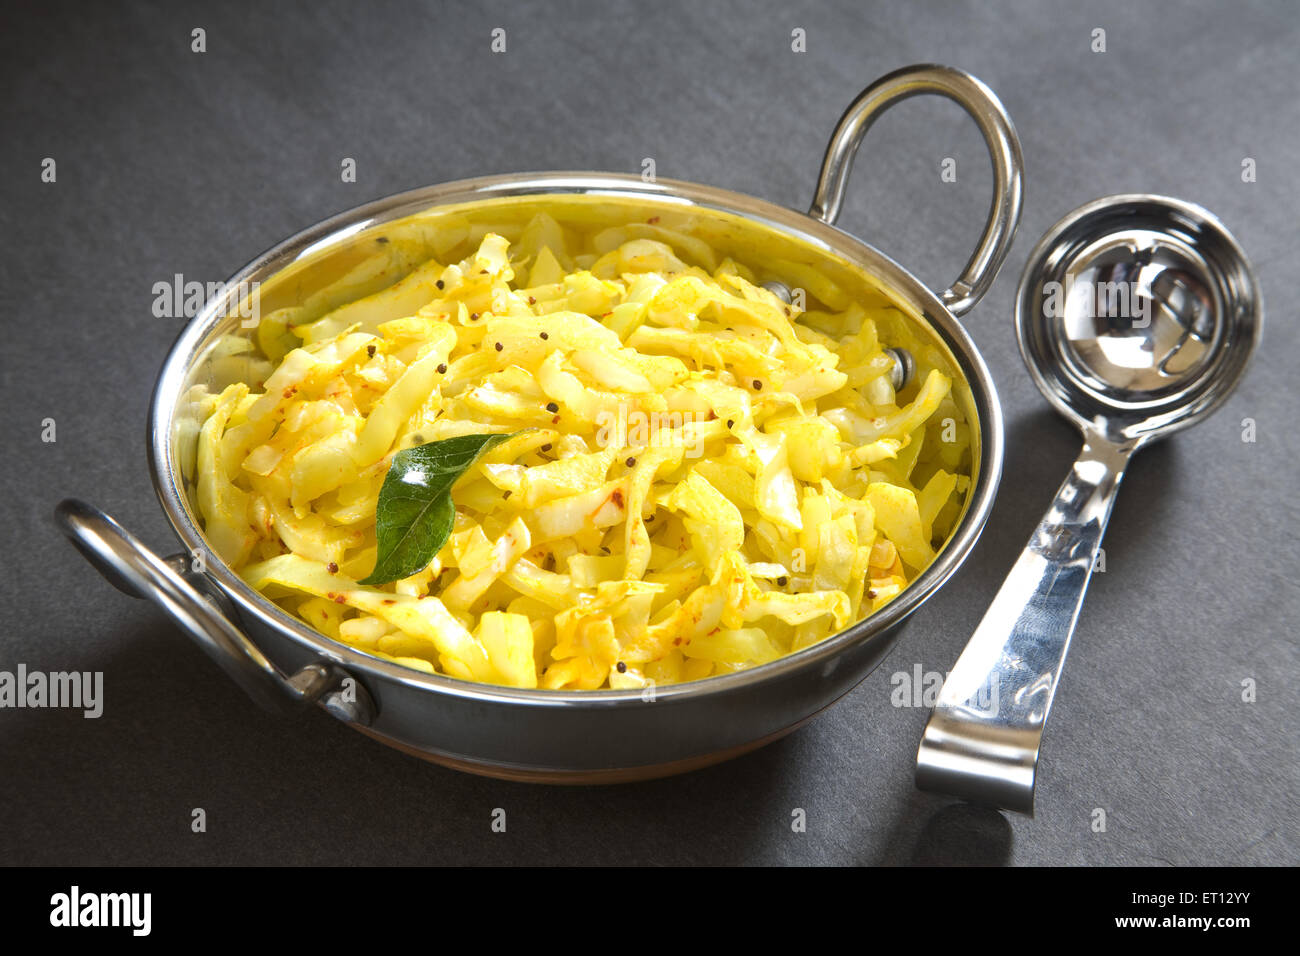 Vegetarian meal ; fry cabbage in pot on grey background 20 May 2010 Stock Photo